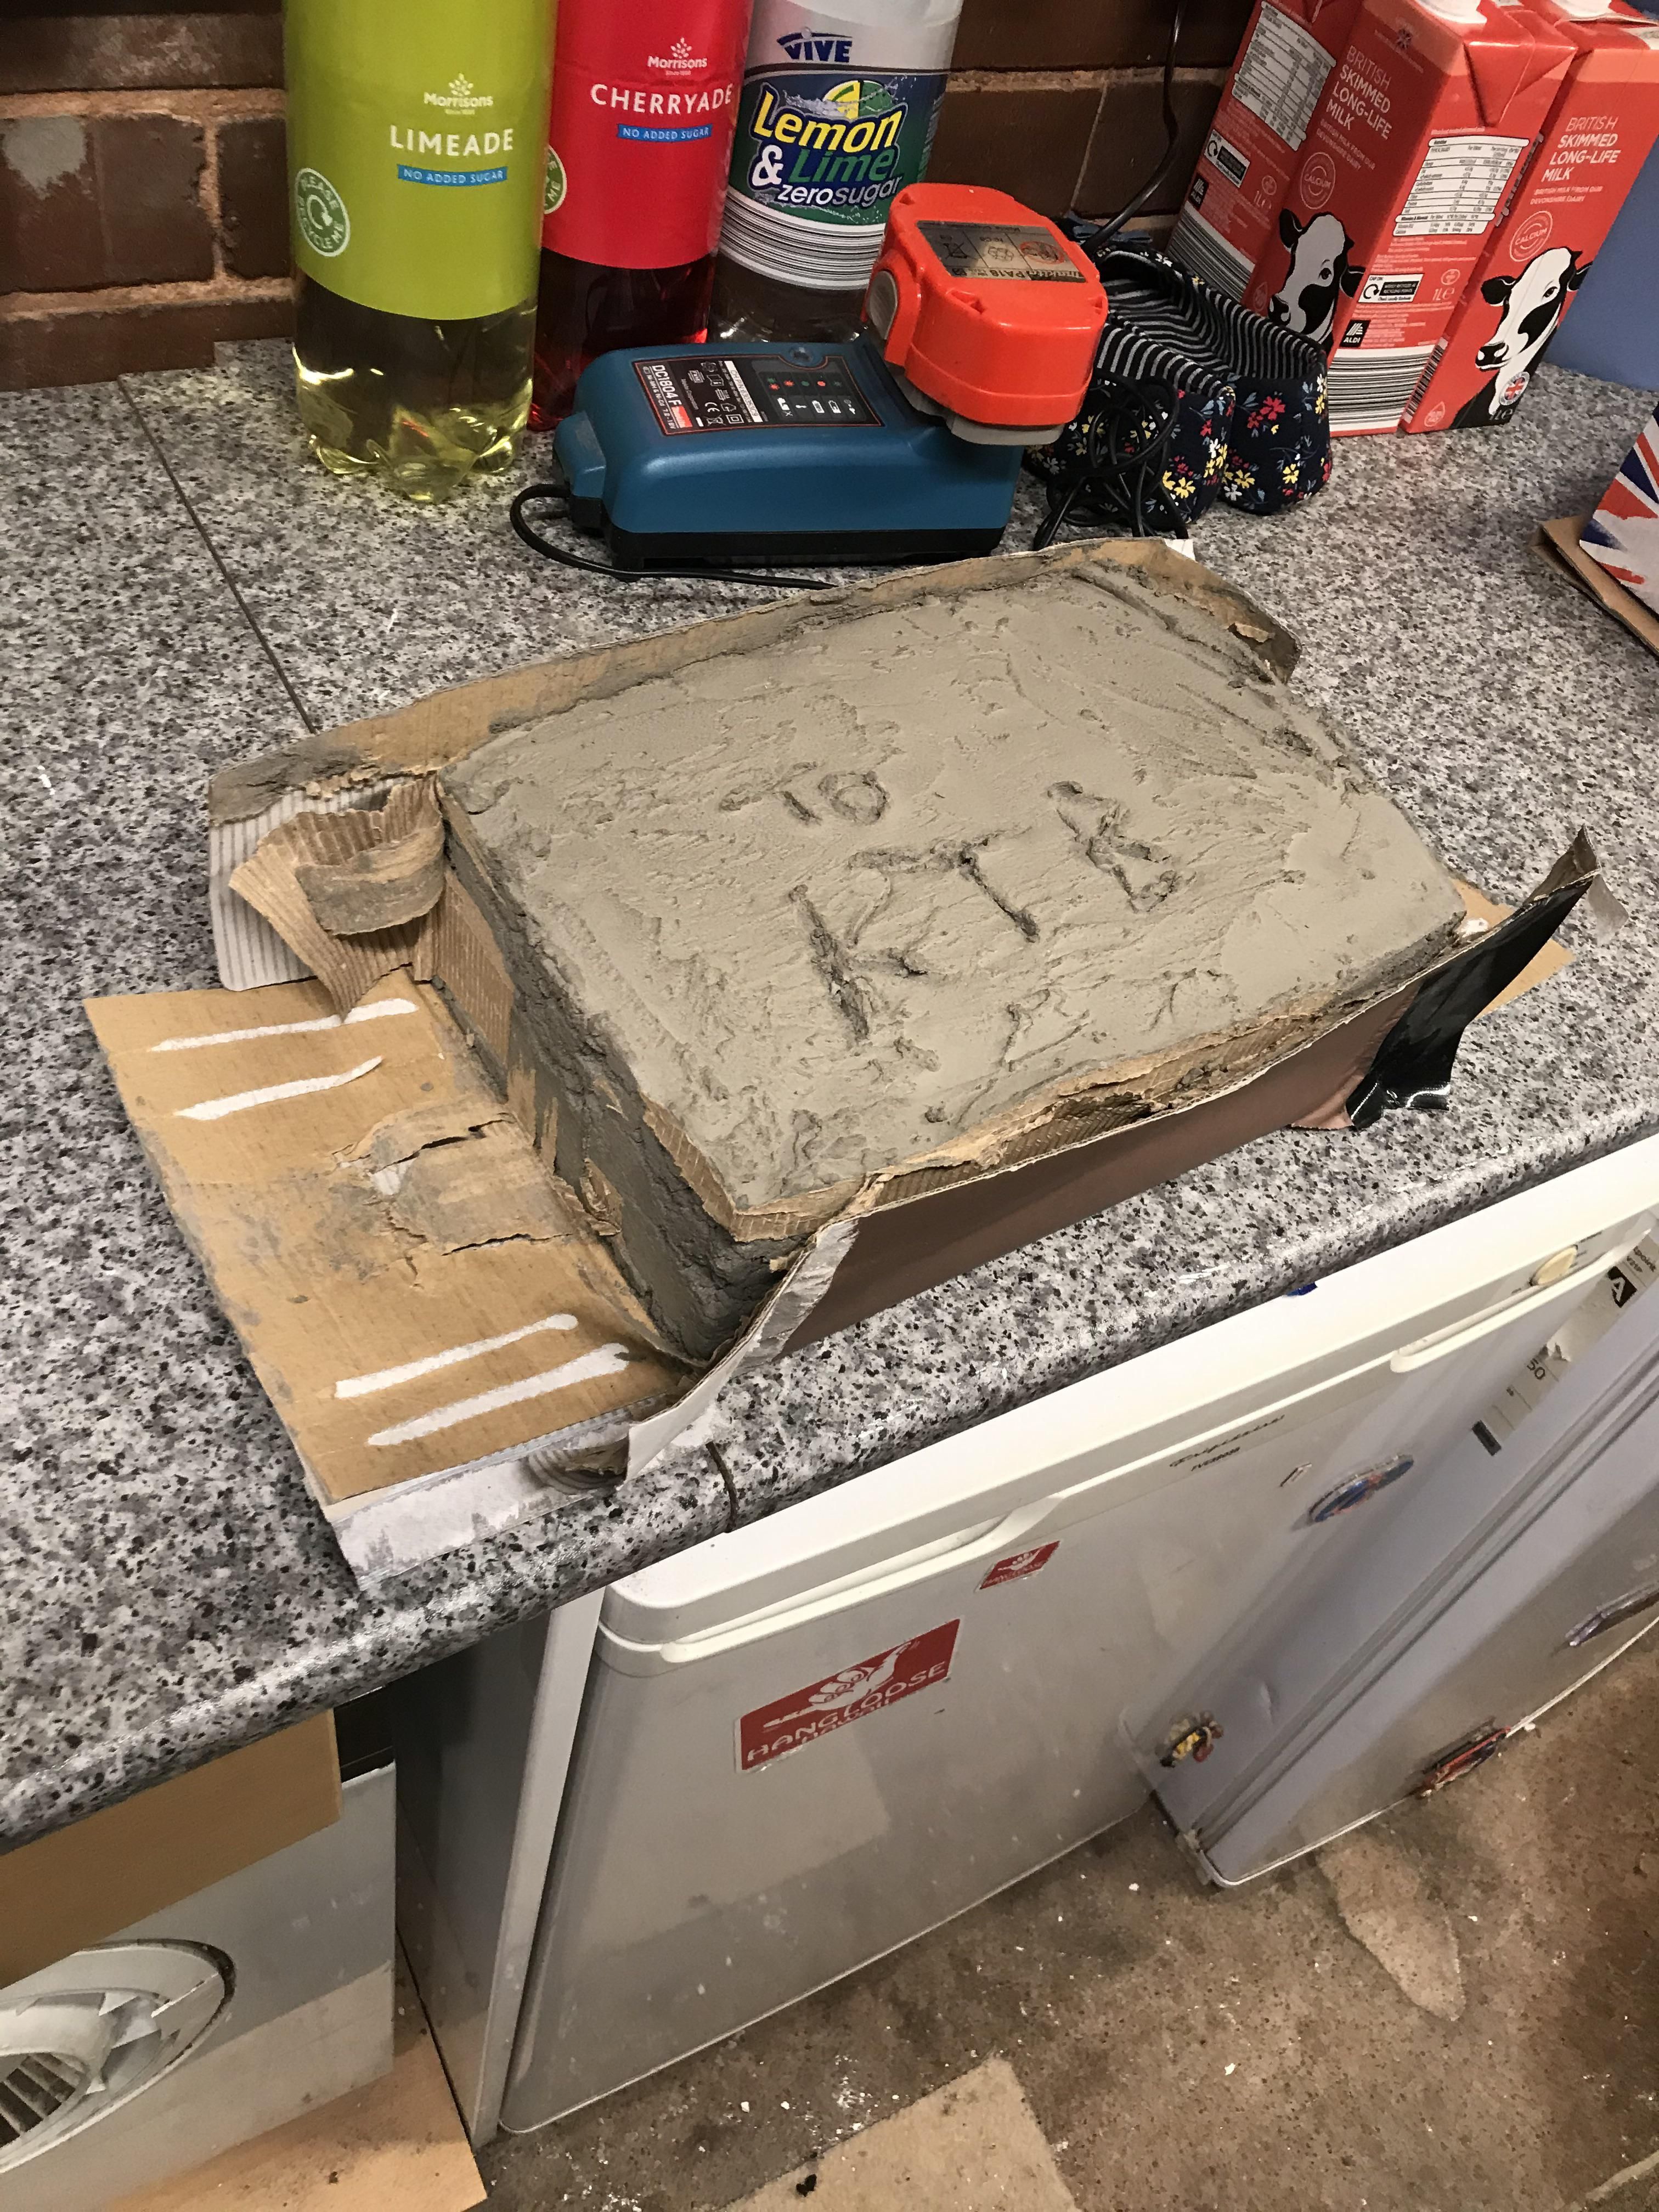 Each year my brother and I compete to give the hardest to open birthday gift. This year I’ve wrapped his gift in concrete